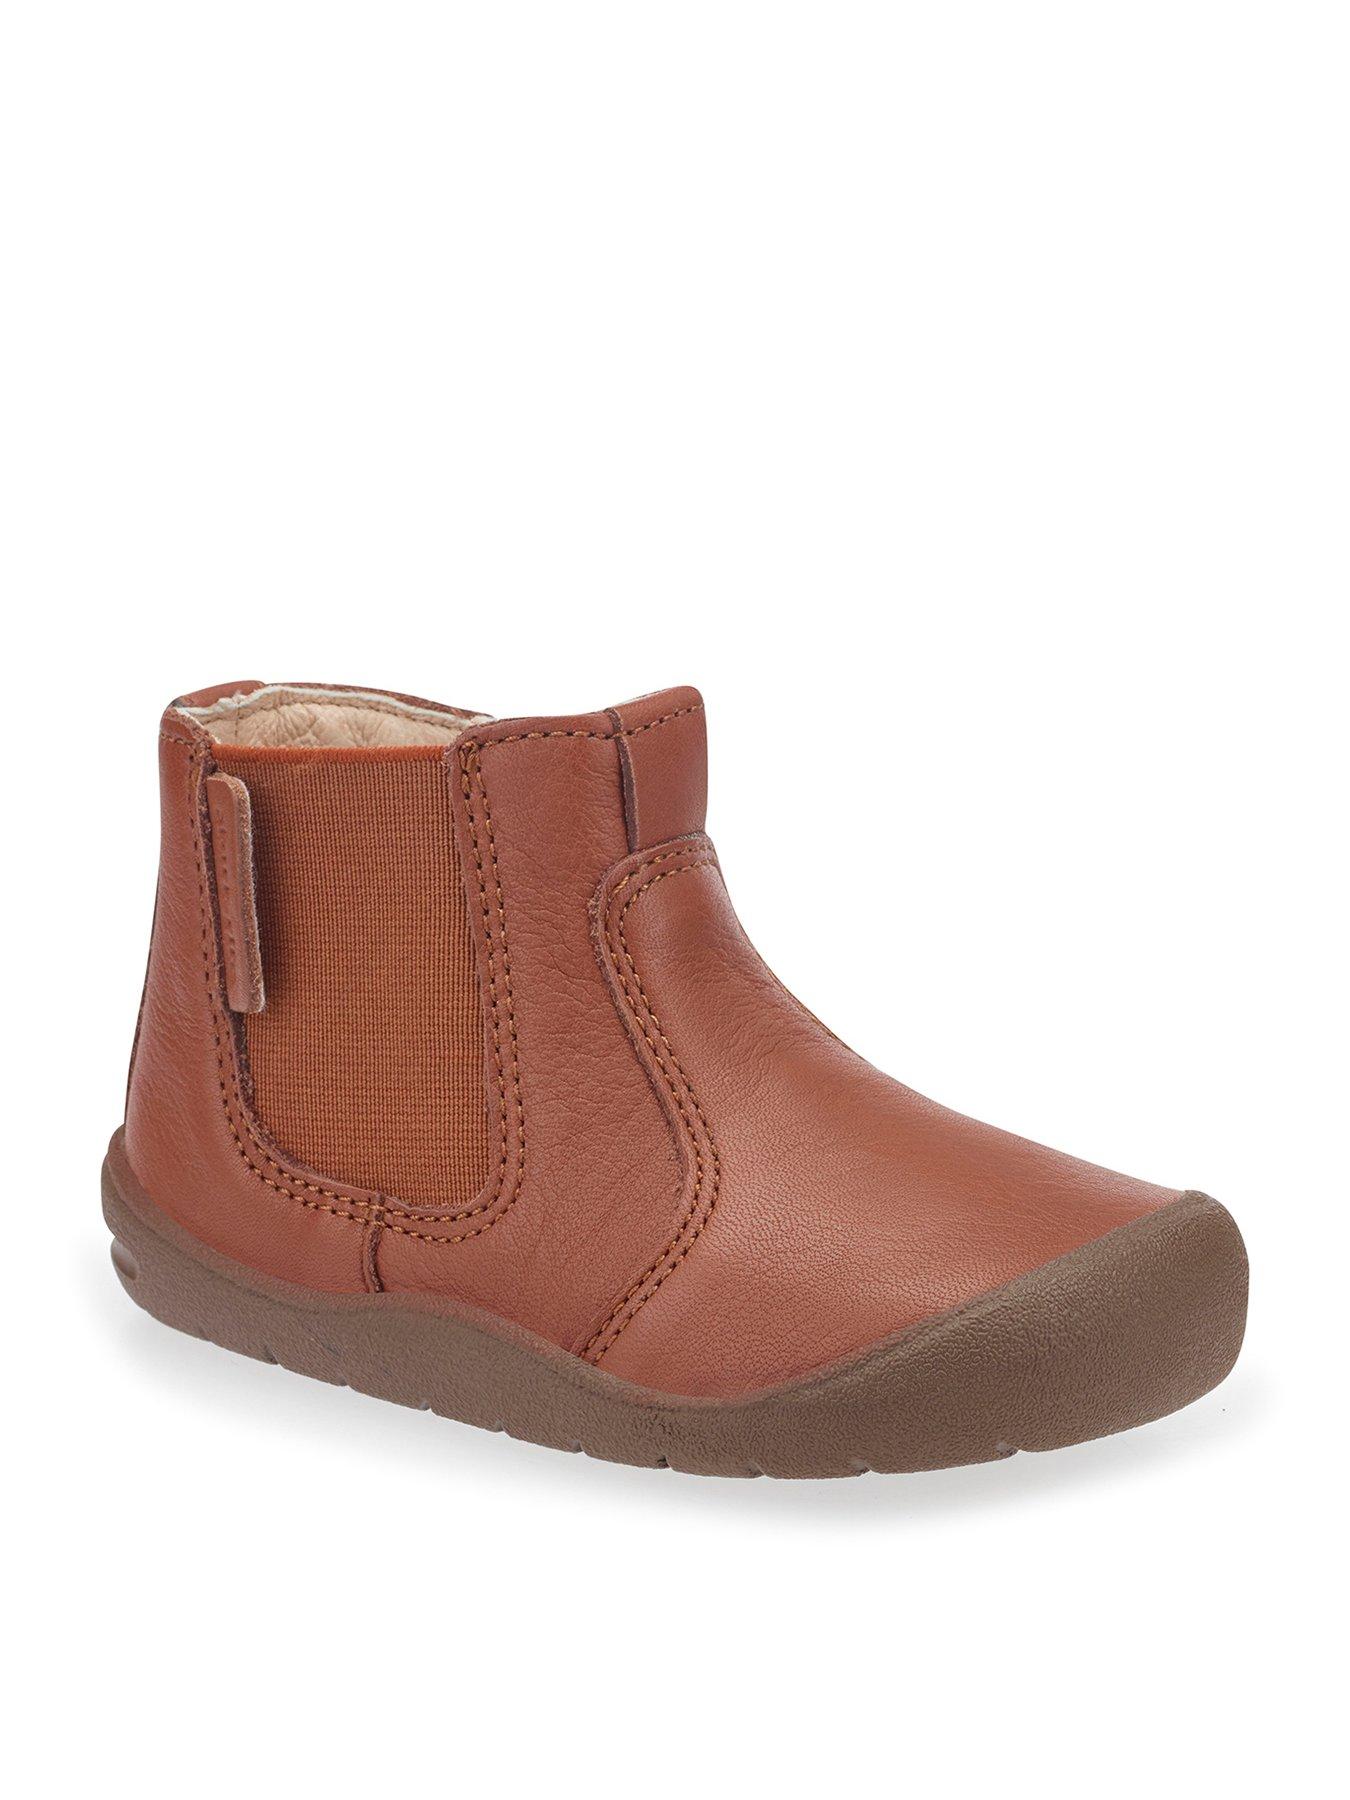 boys wide fit boots